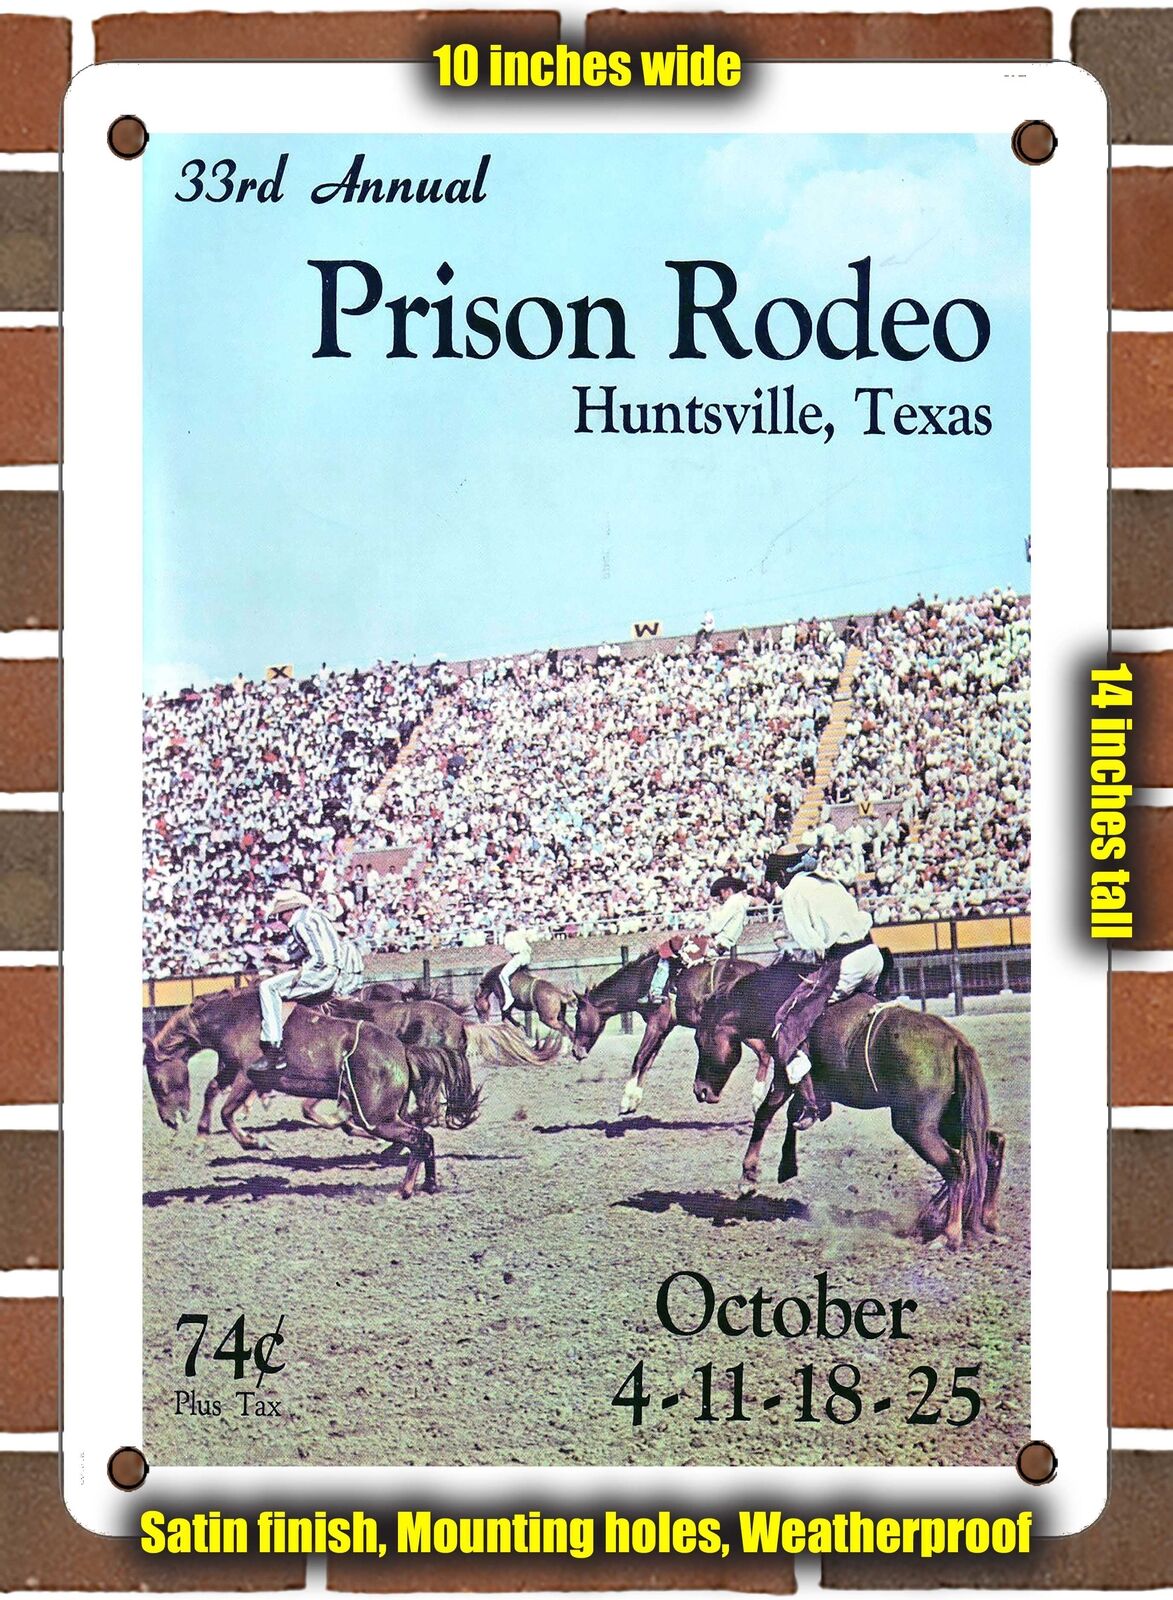 METAL SIGN - 1964 33rd Annual Prison Rodeo Huntsville Texas - 10x14 Inches